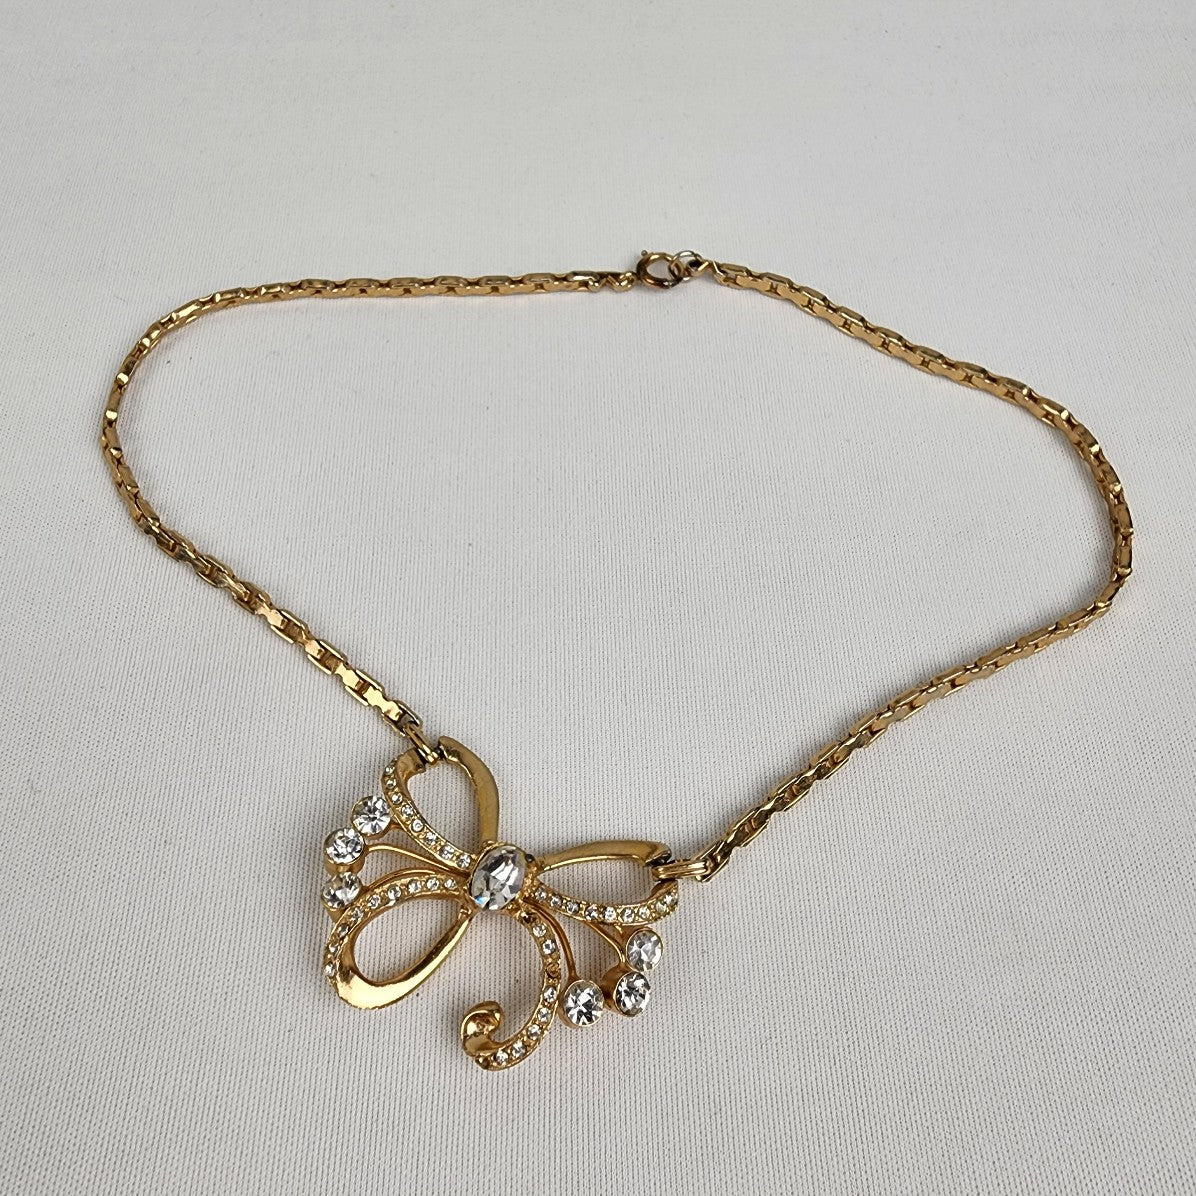 Vintage 12k Gold Fill Crystal Bow Collar Necklace